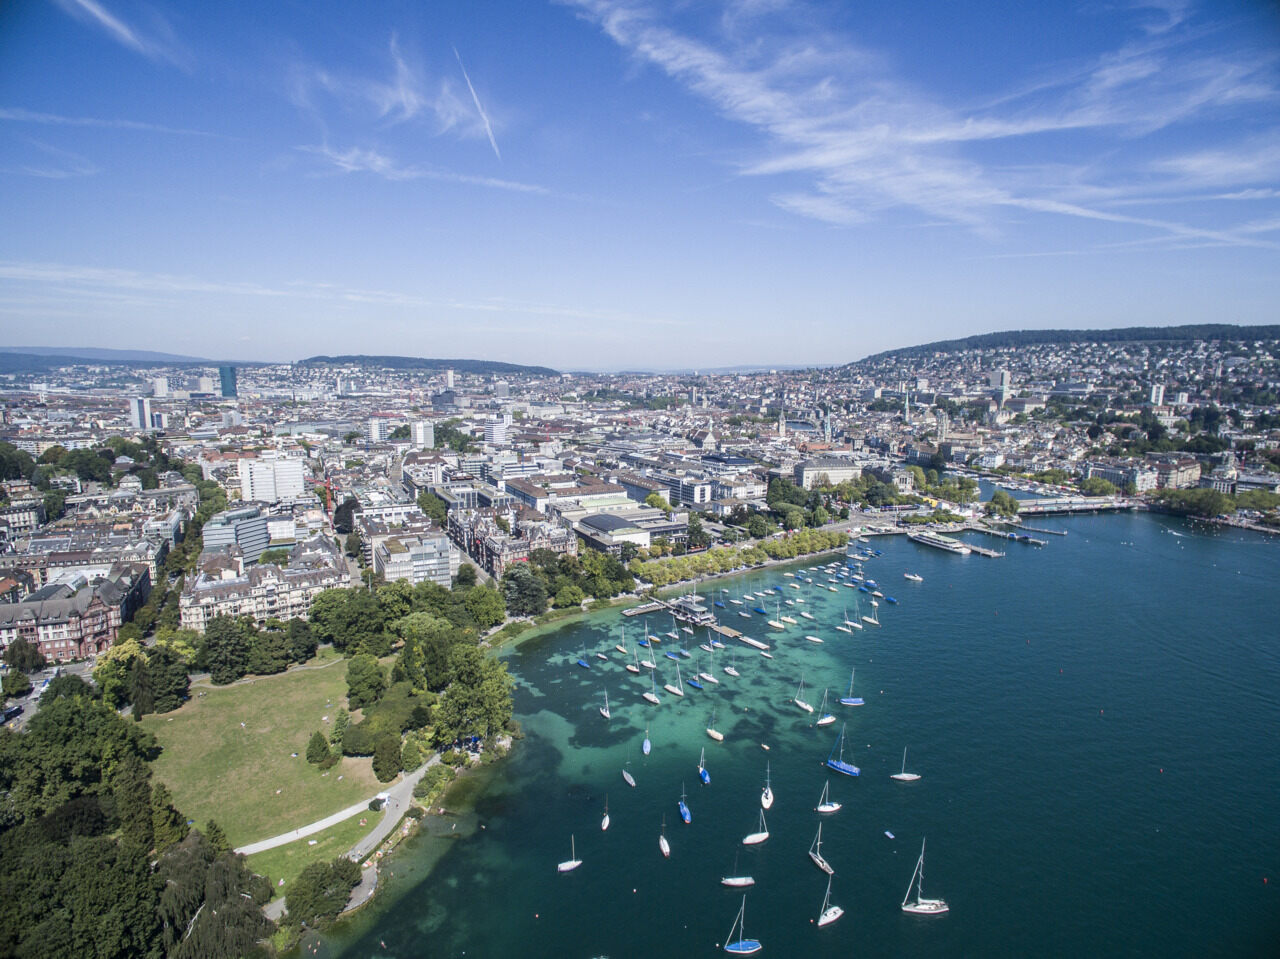 19-astounding-facts-about-lake-zurich